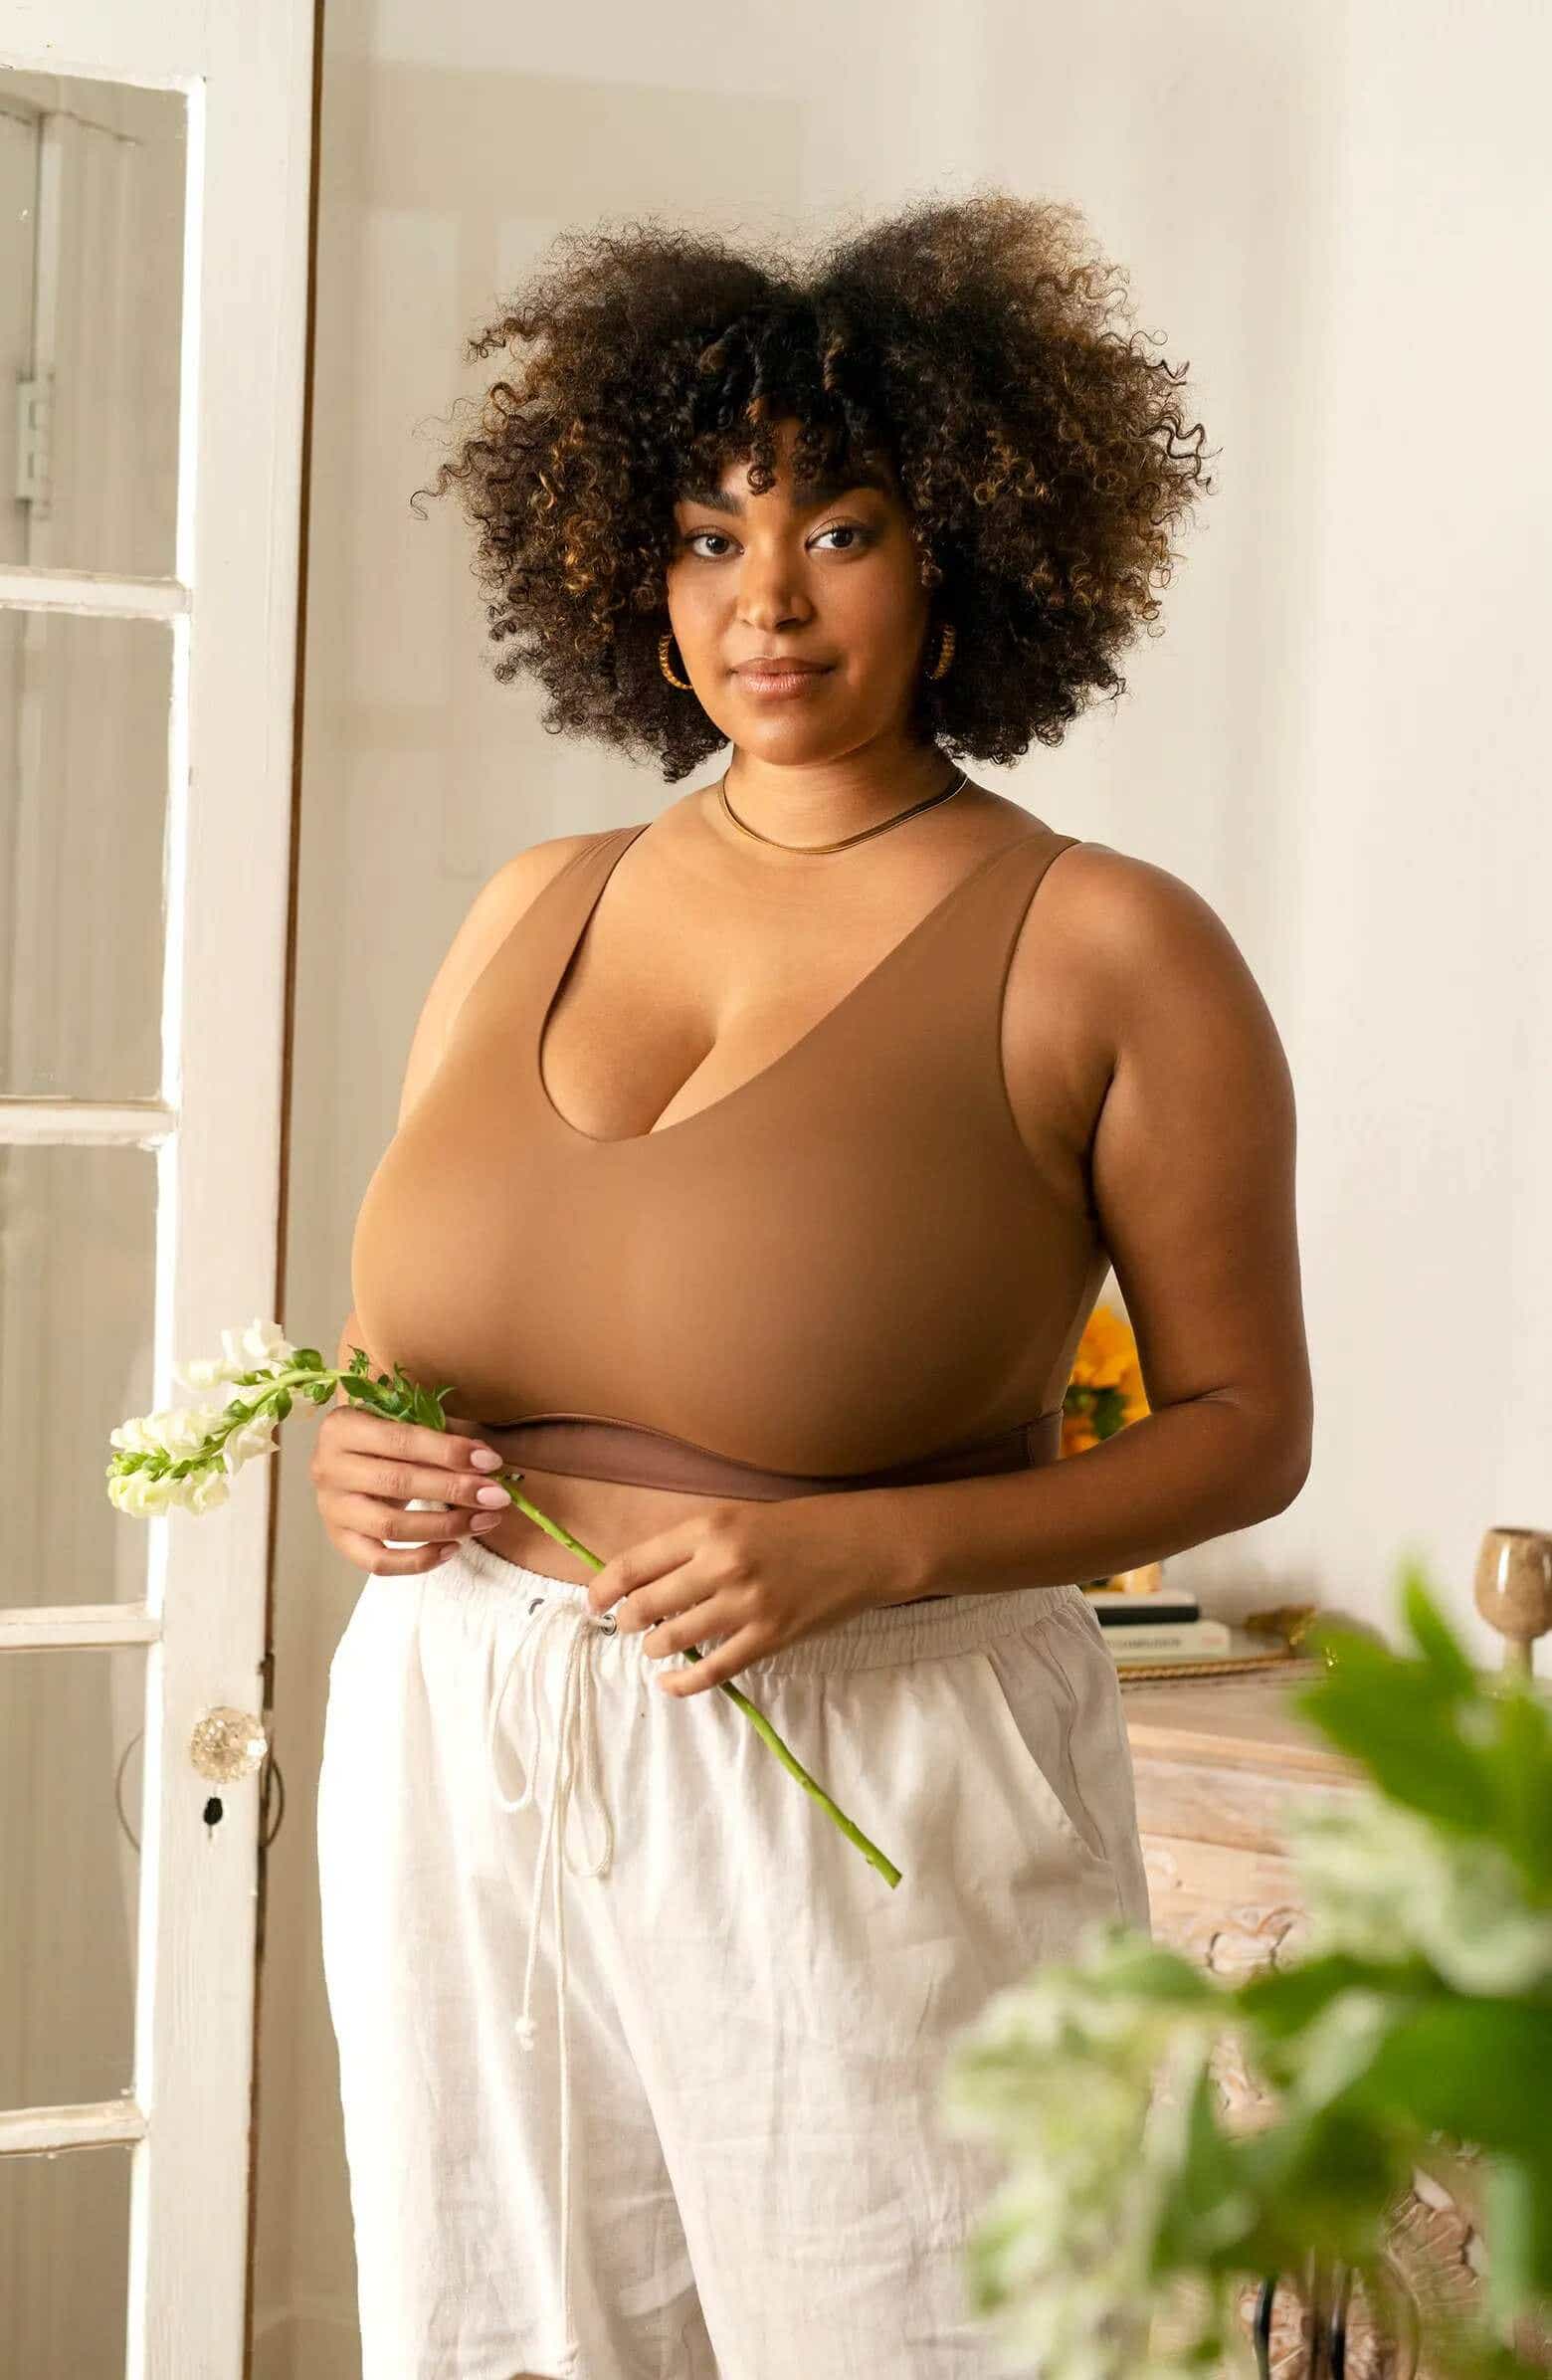 christine blanton recommends huge tits in clothes pic